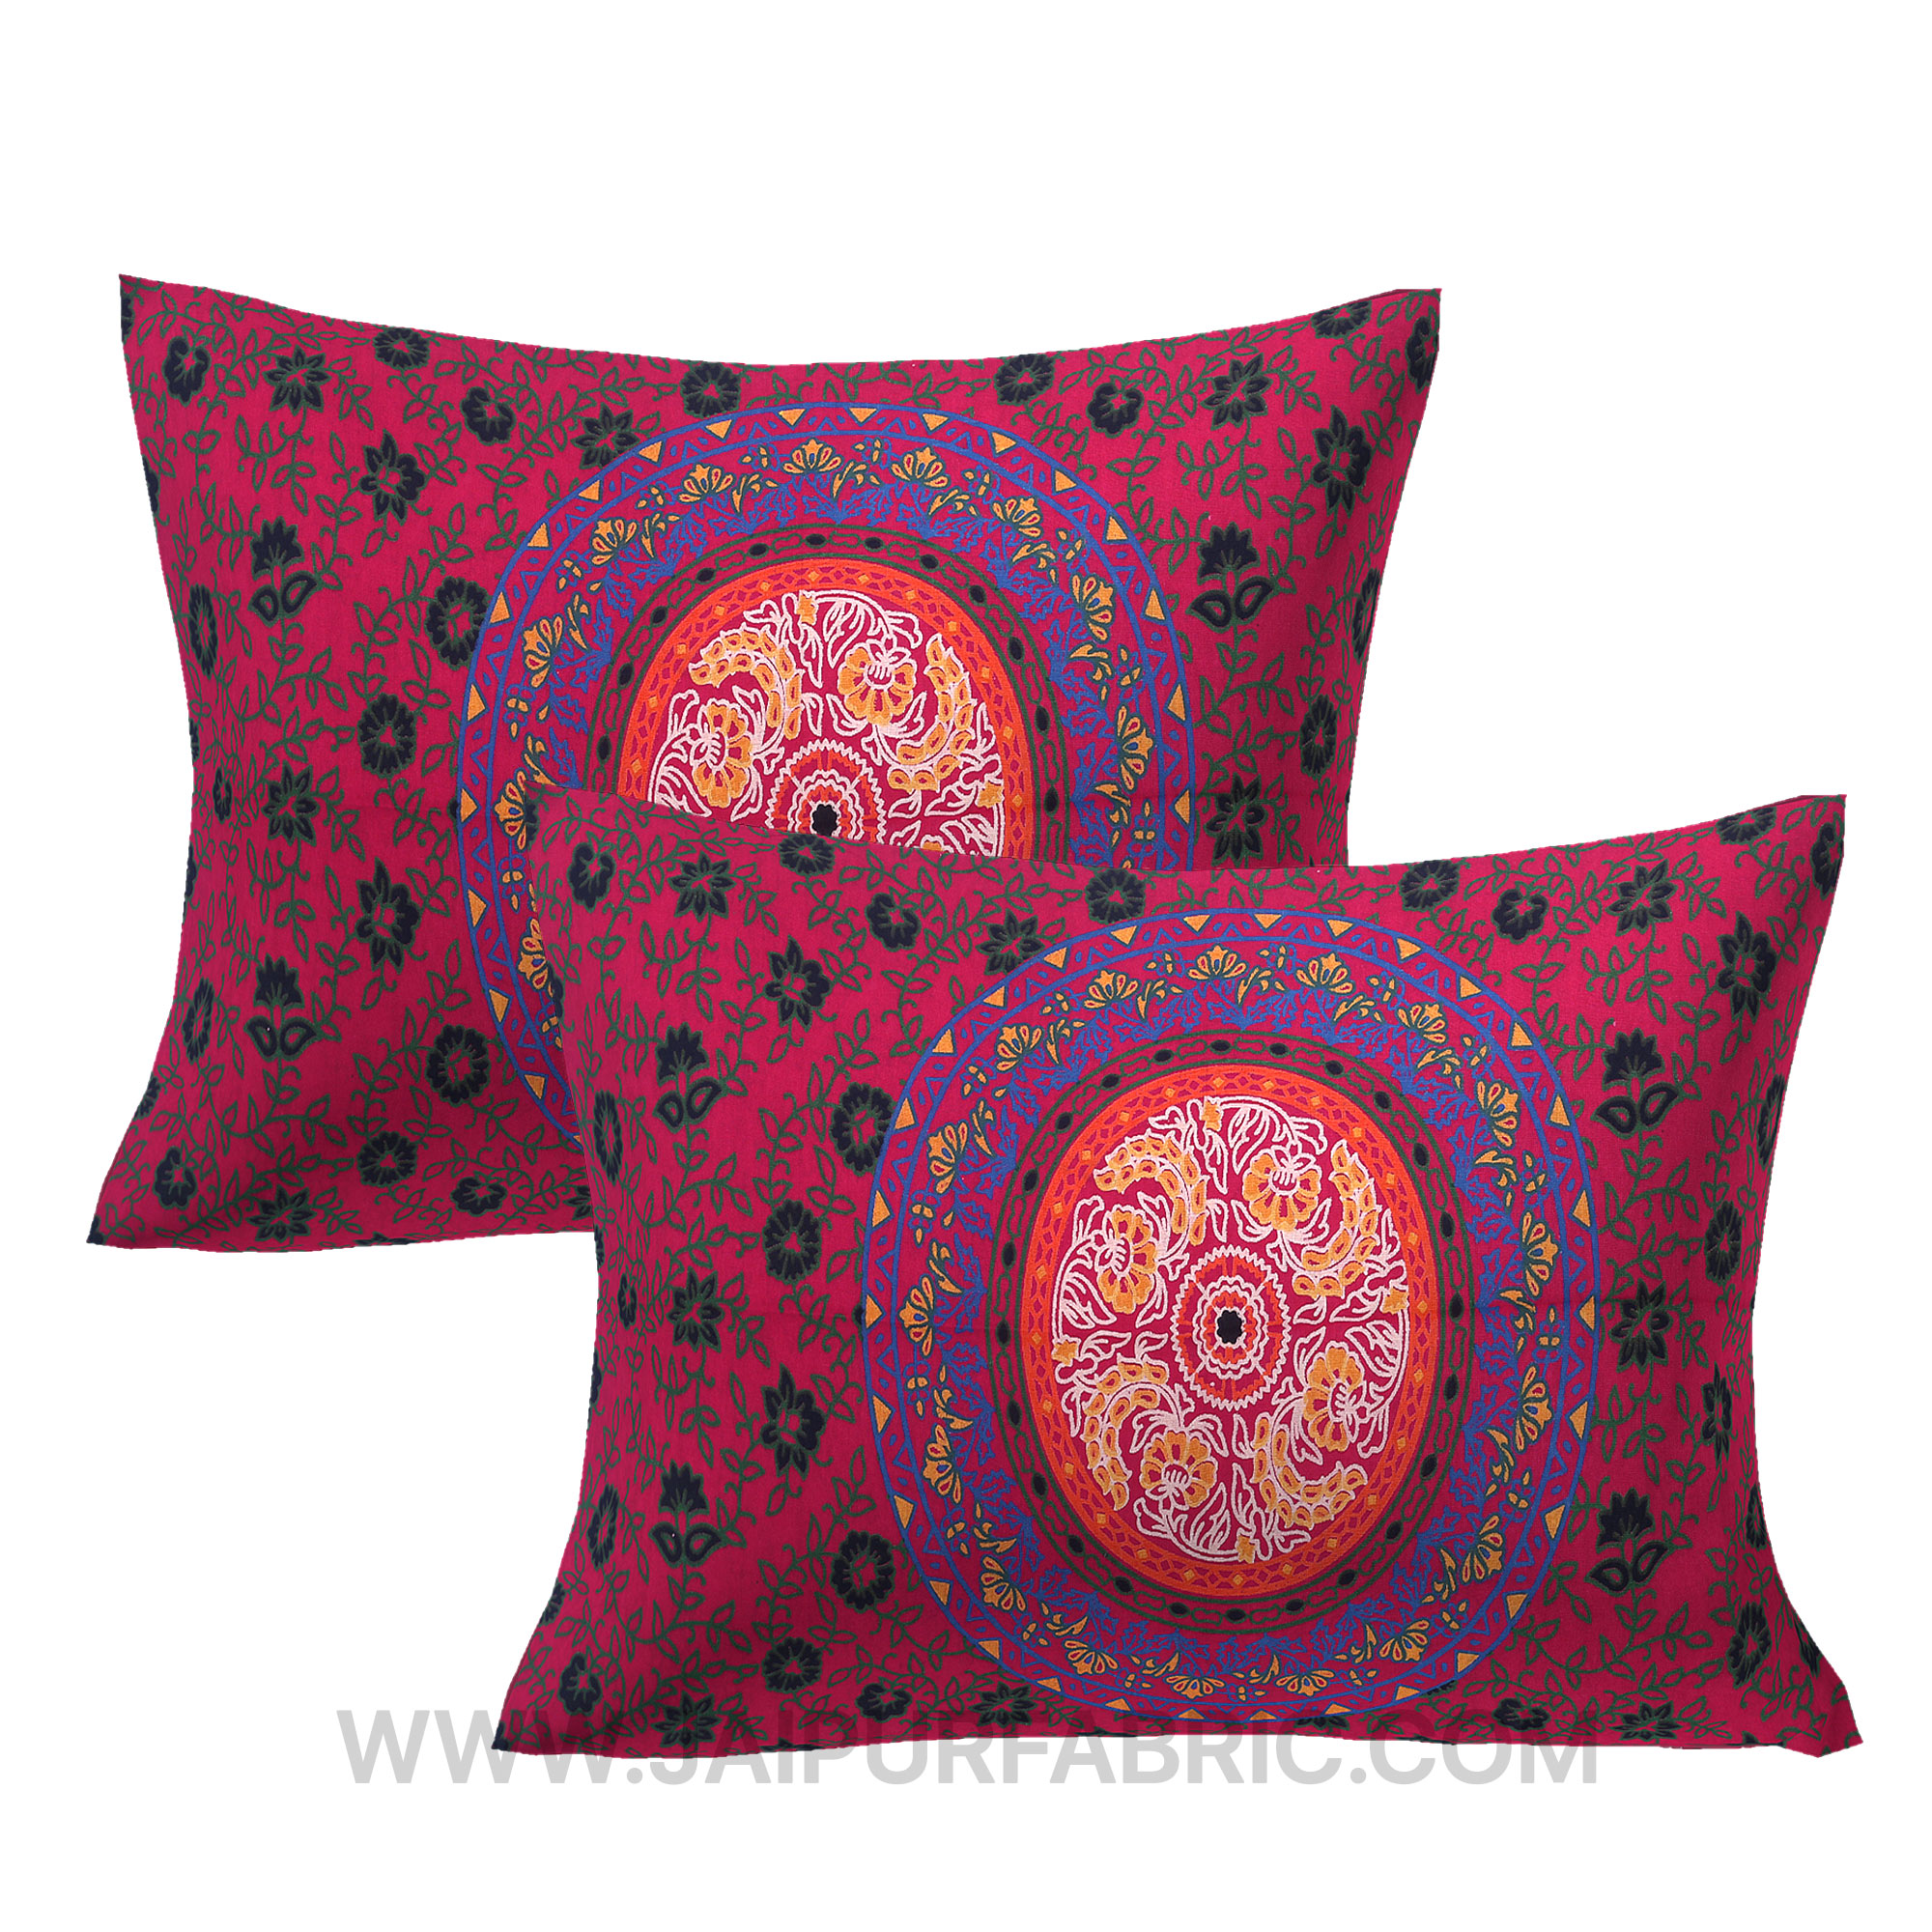 Red Double Bedsheet Indian Mandala Tapestry Hippy Tapestries Hippie Beach Throw